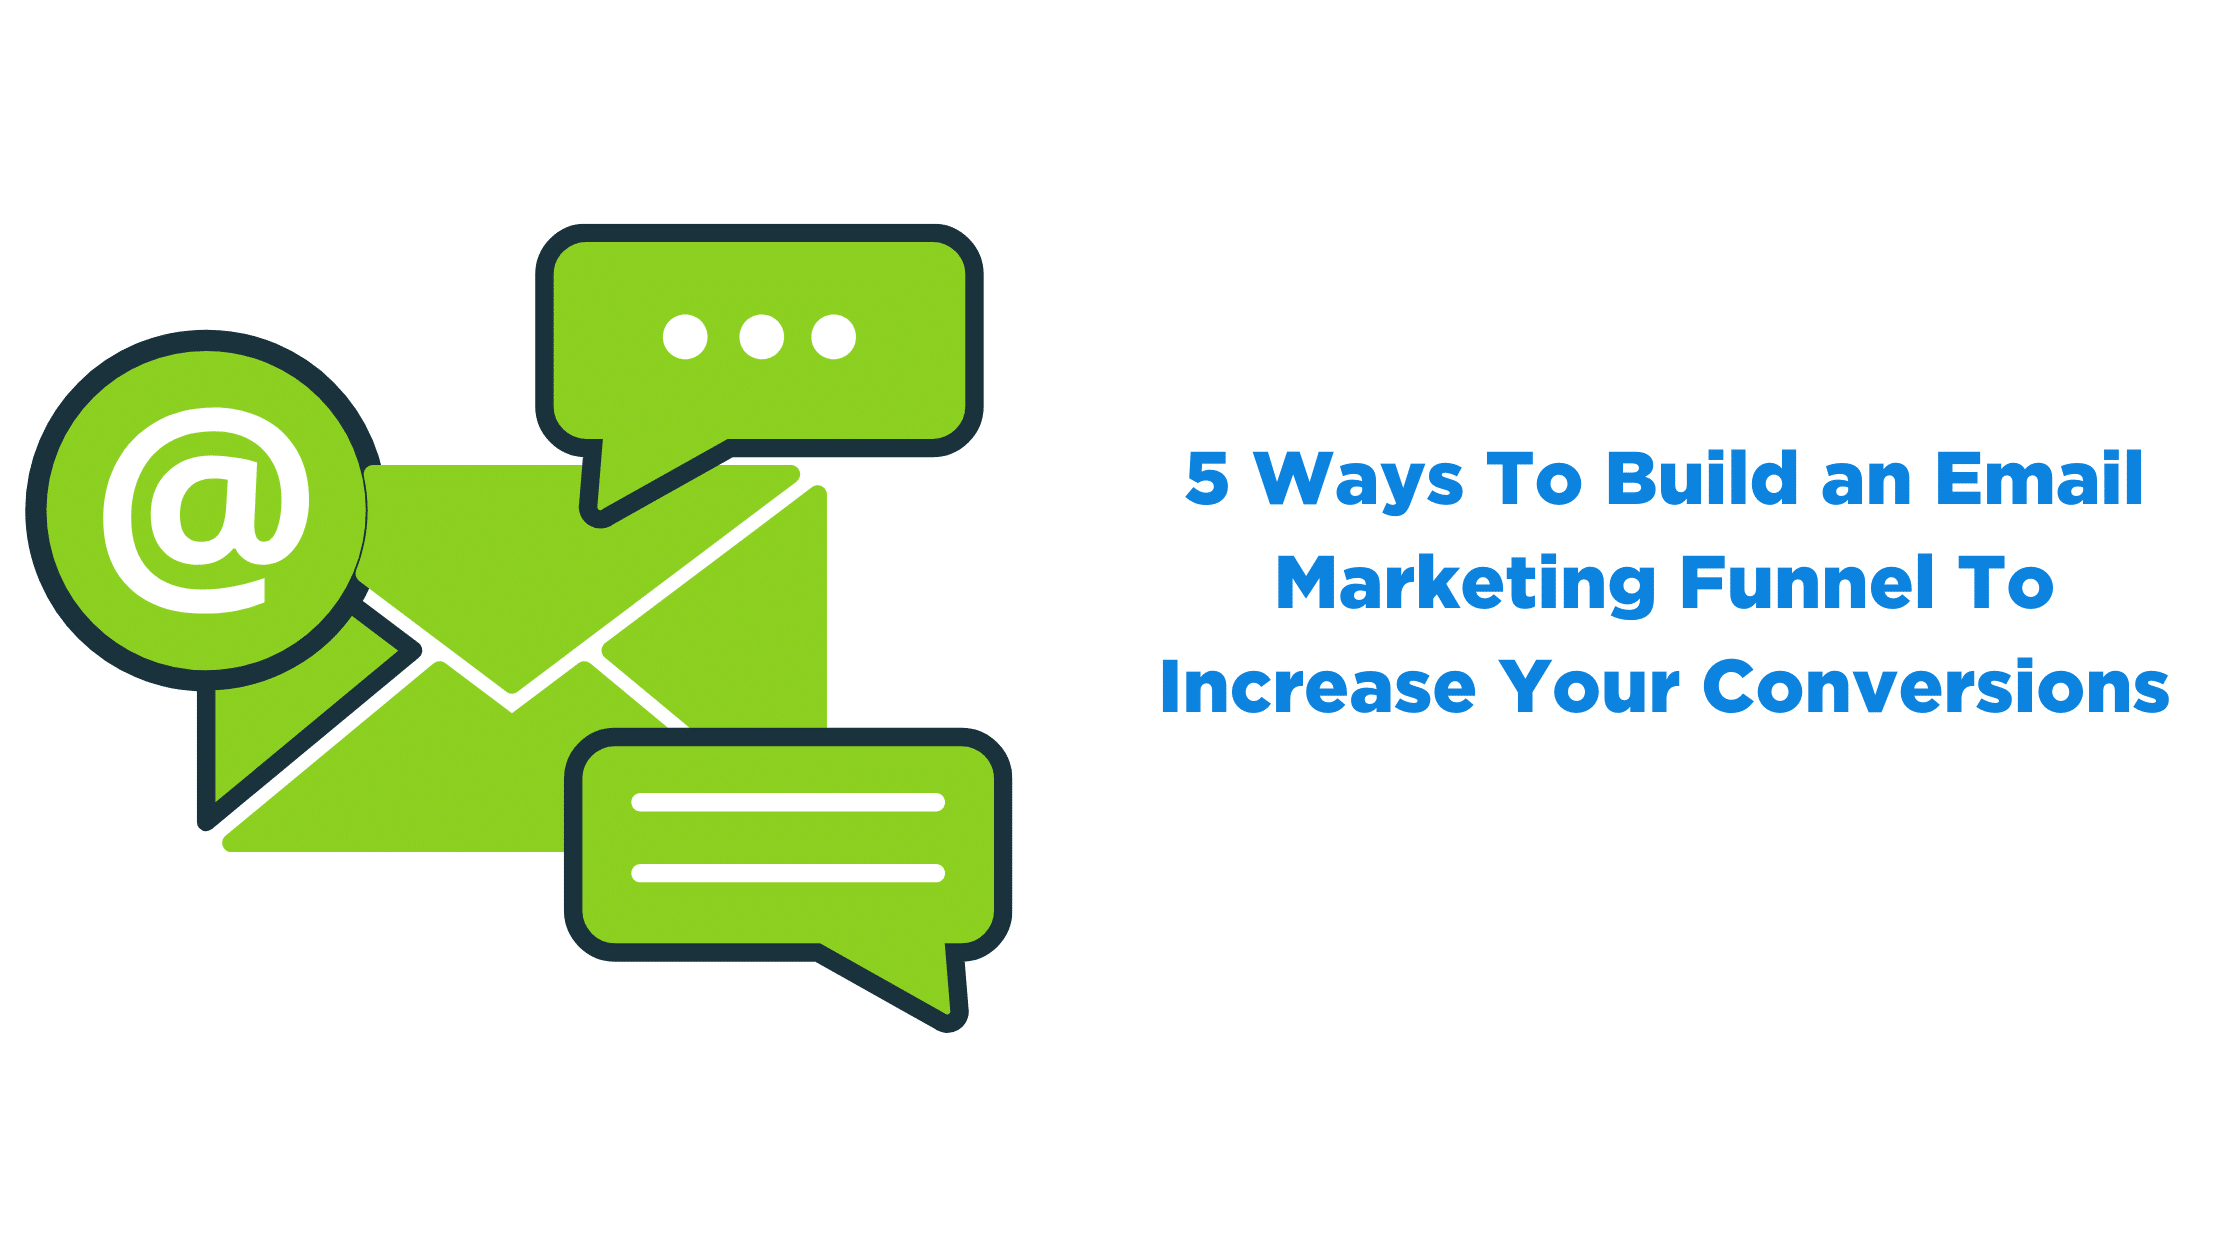 5 Ways To Build An Email Marketing Funnel To Increase Your Conversions